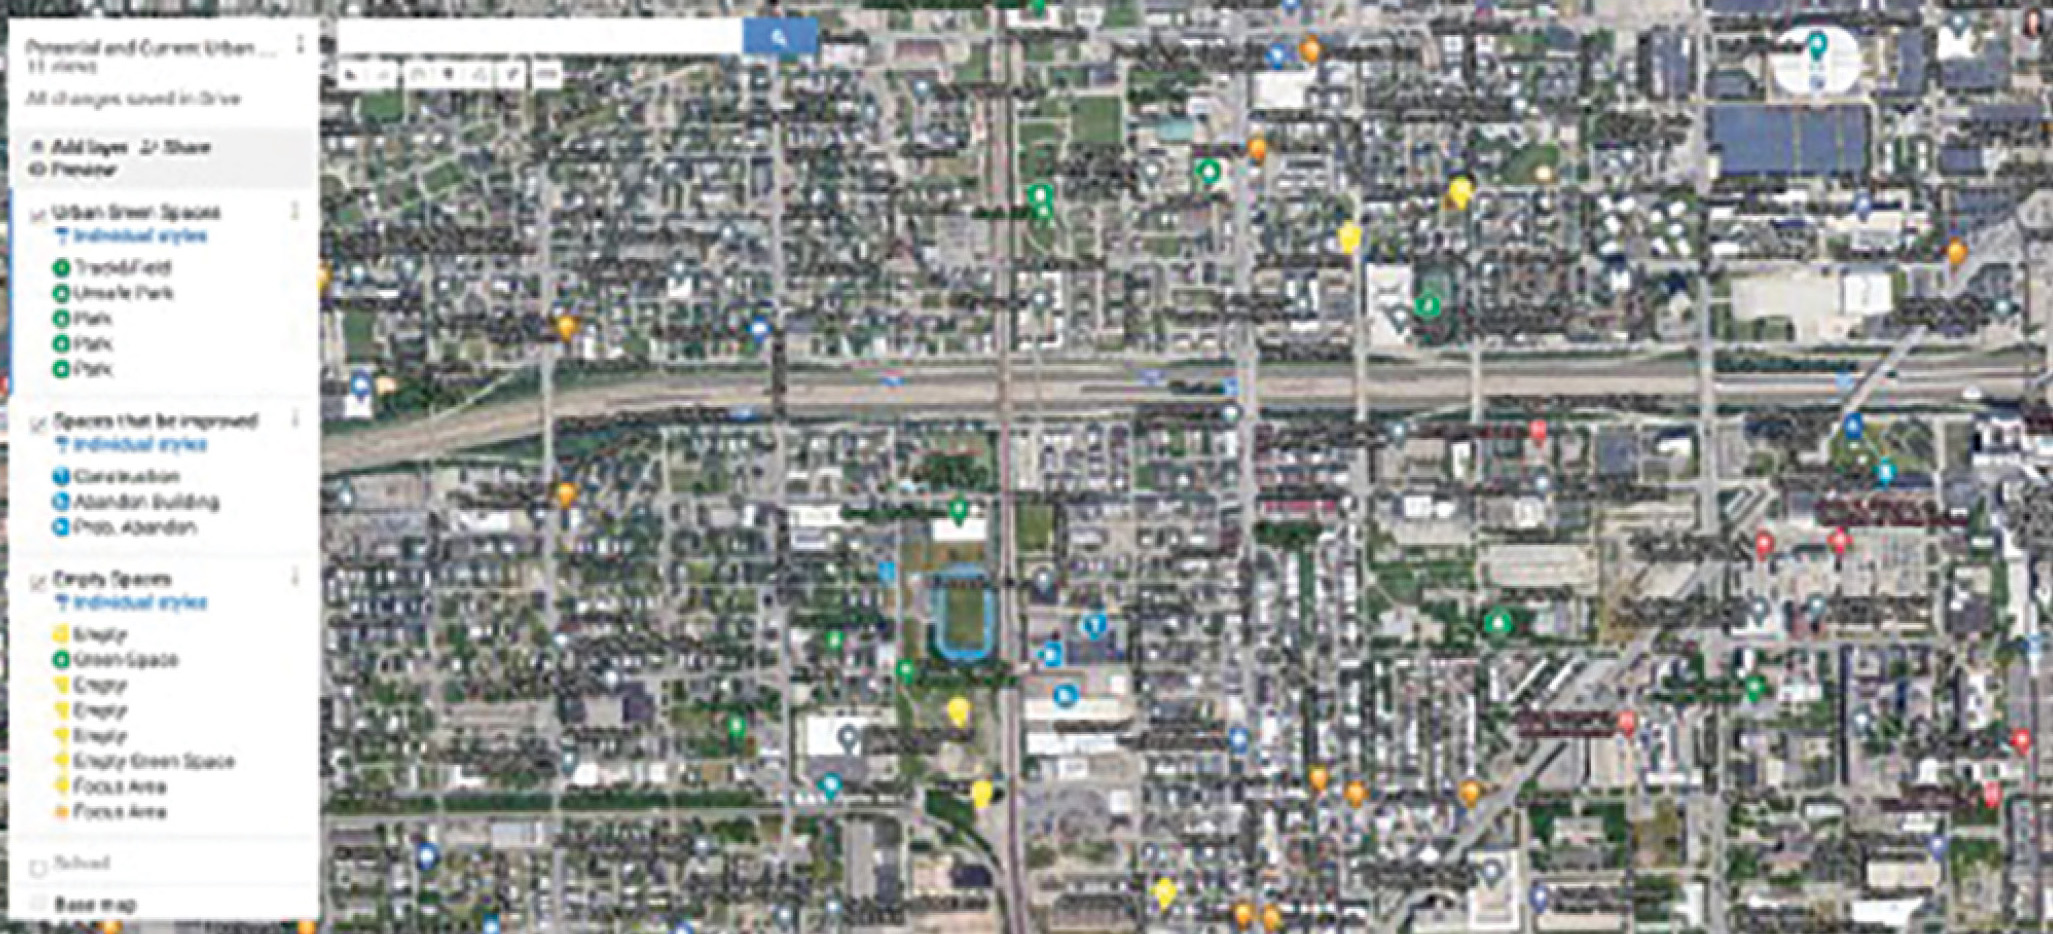 Figure 7 My Maps on Google is a tool for students to mark current and potential urban greenspaces in their community.